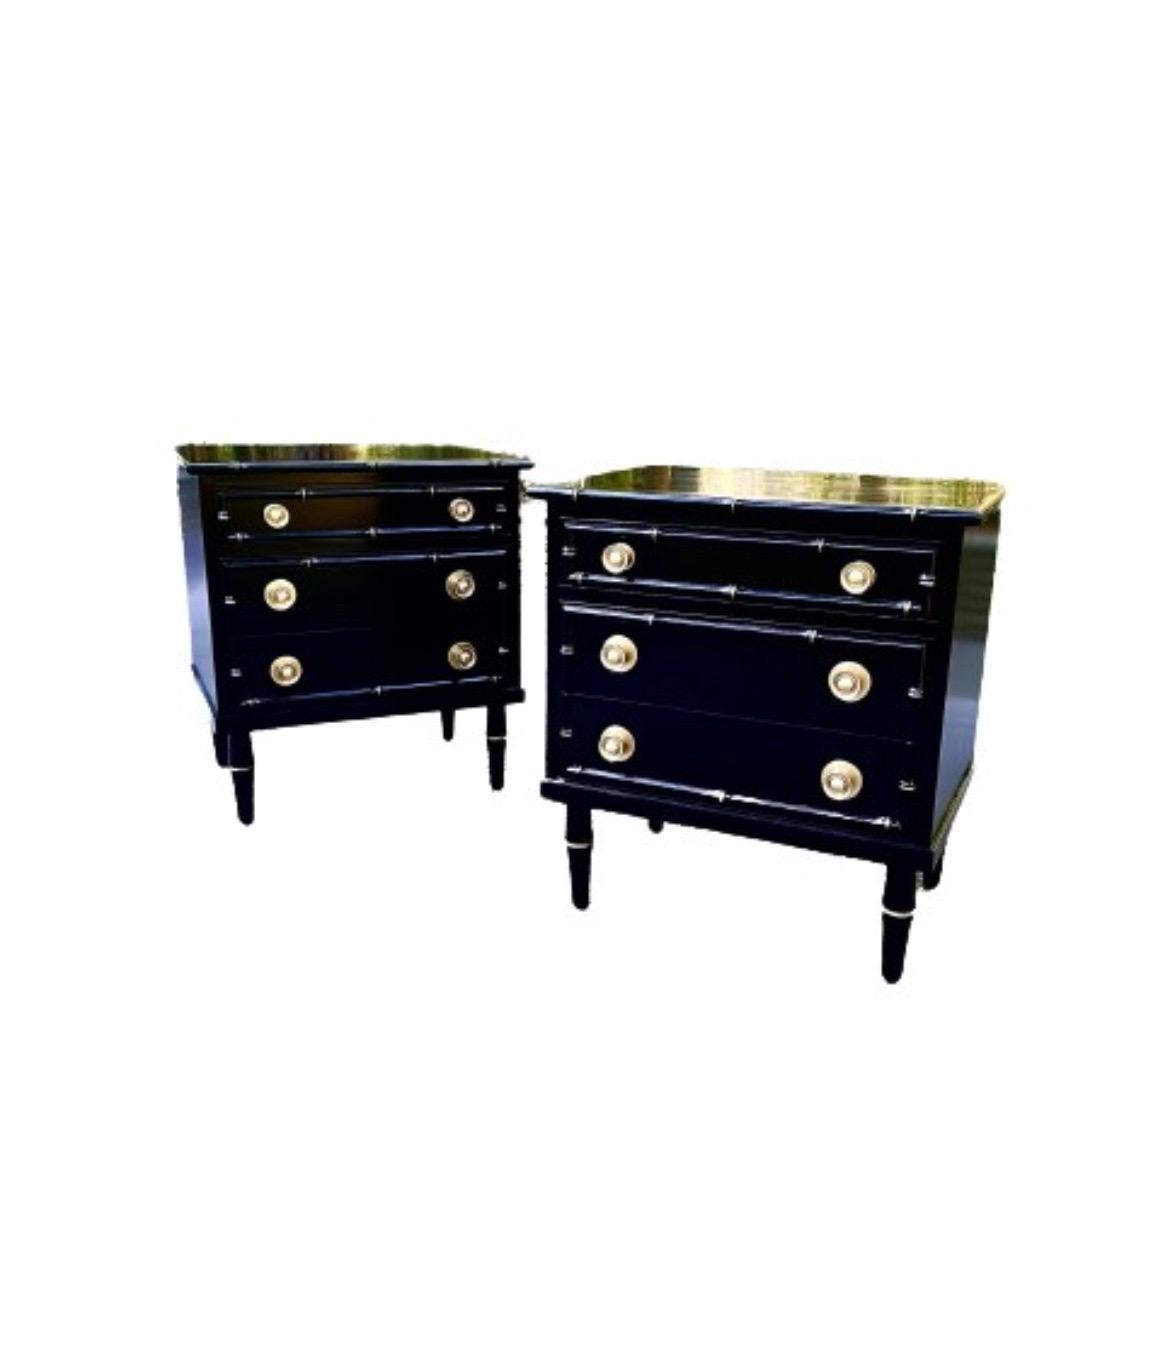 Elegant Pair of Black Lacquer and Brass Small Chests by Ficks Reed, circa 1960 For Sale 13